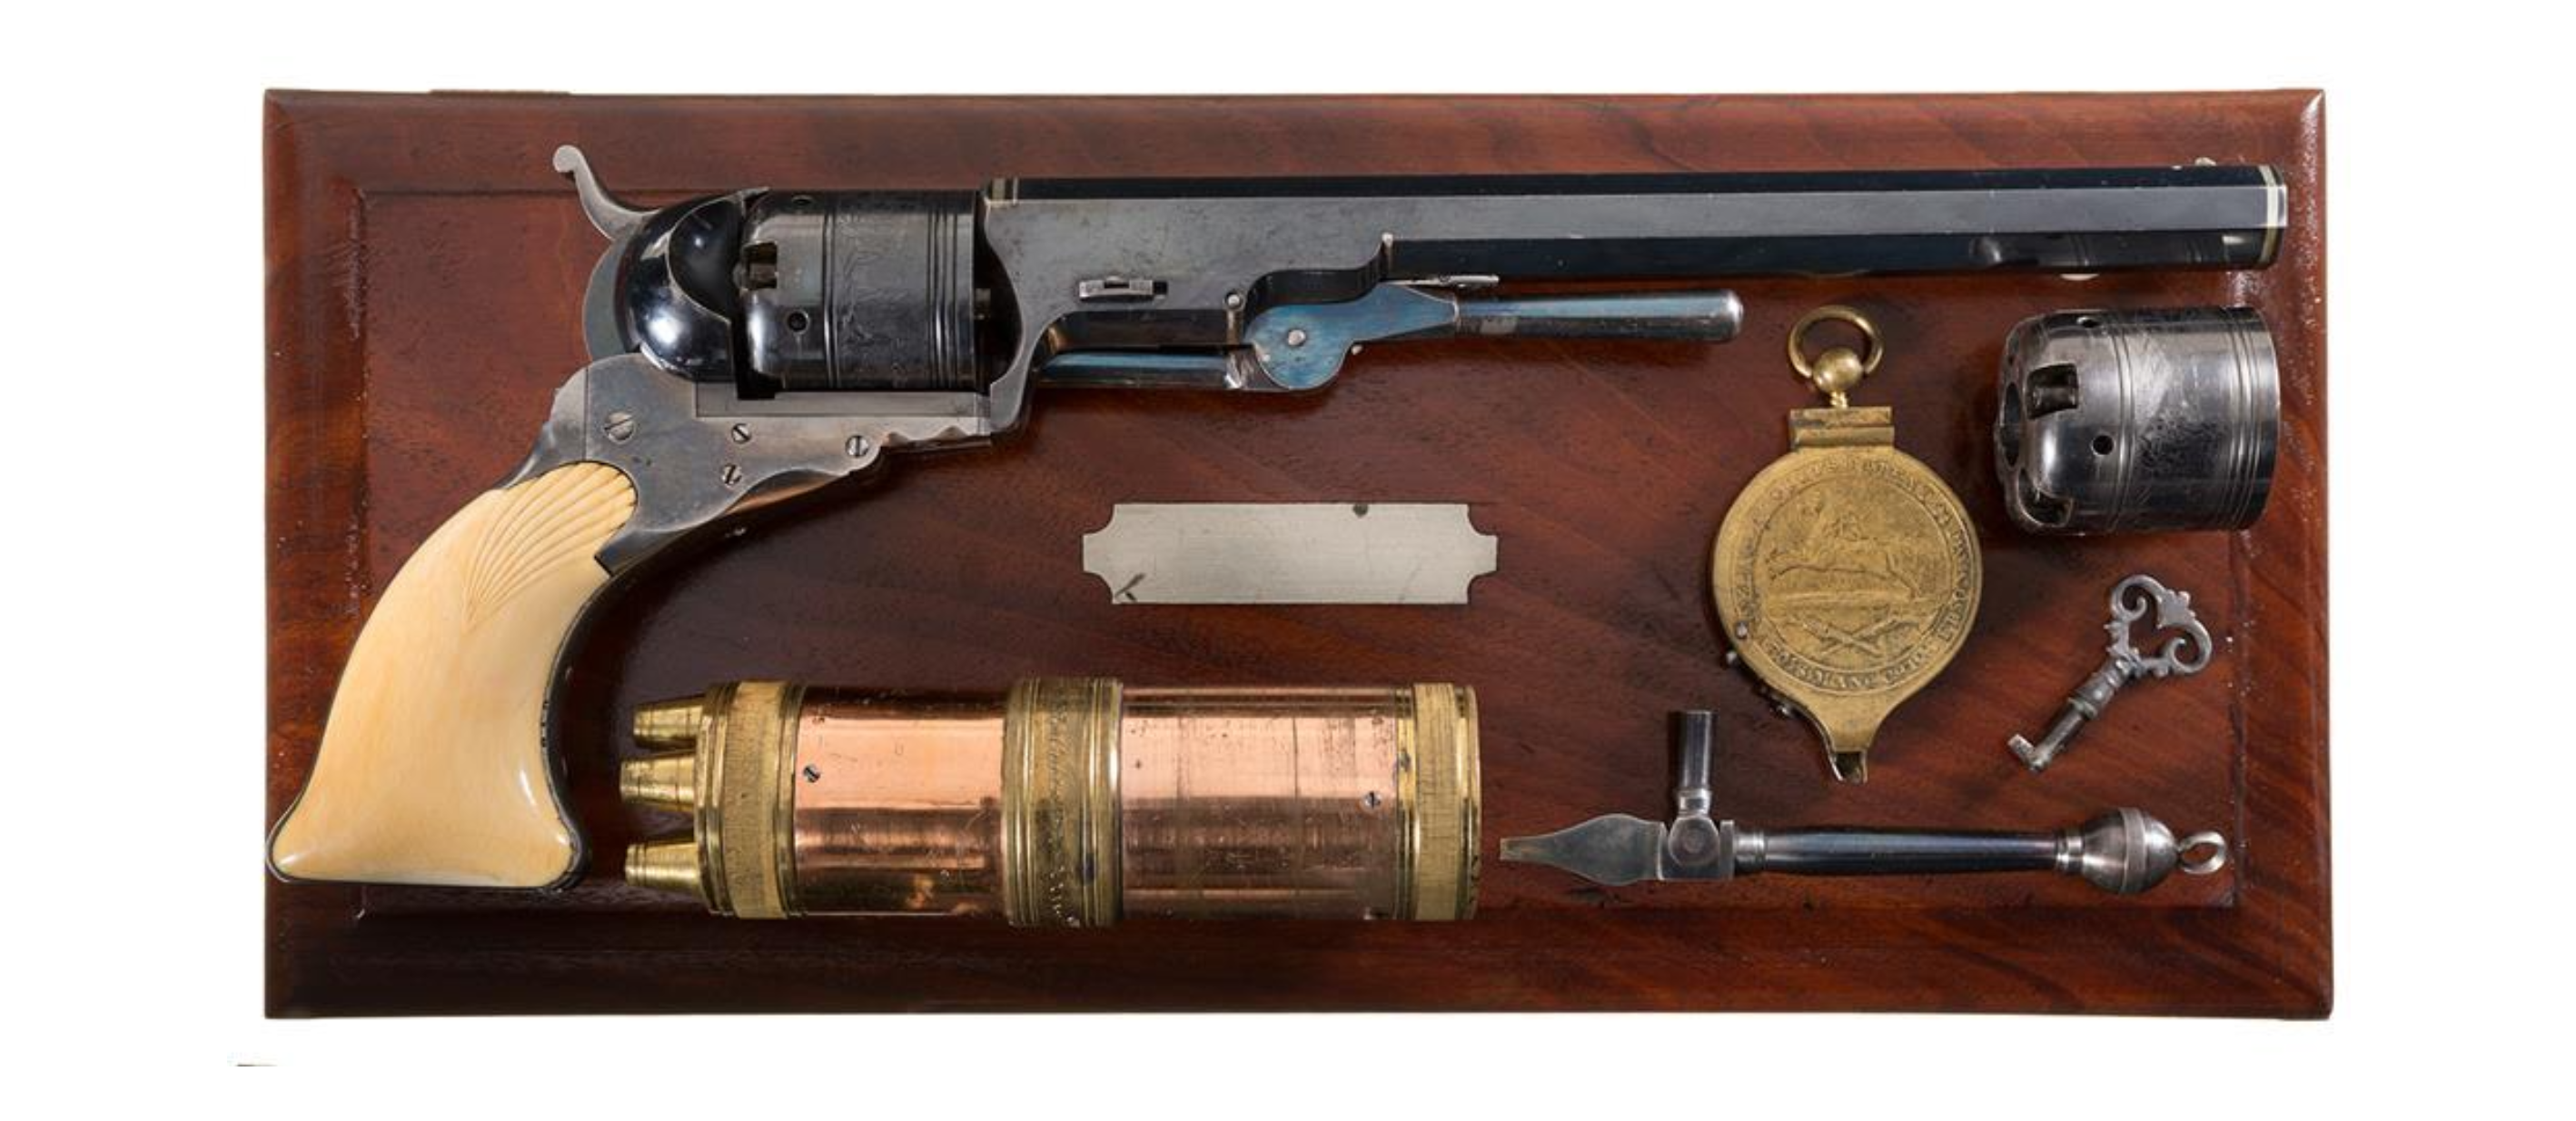 10 Rock Island Auction Guns That Sold for Over $1 Million